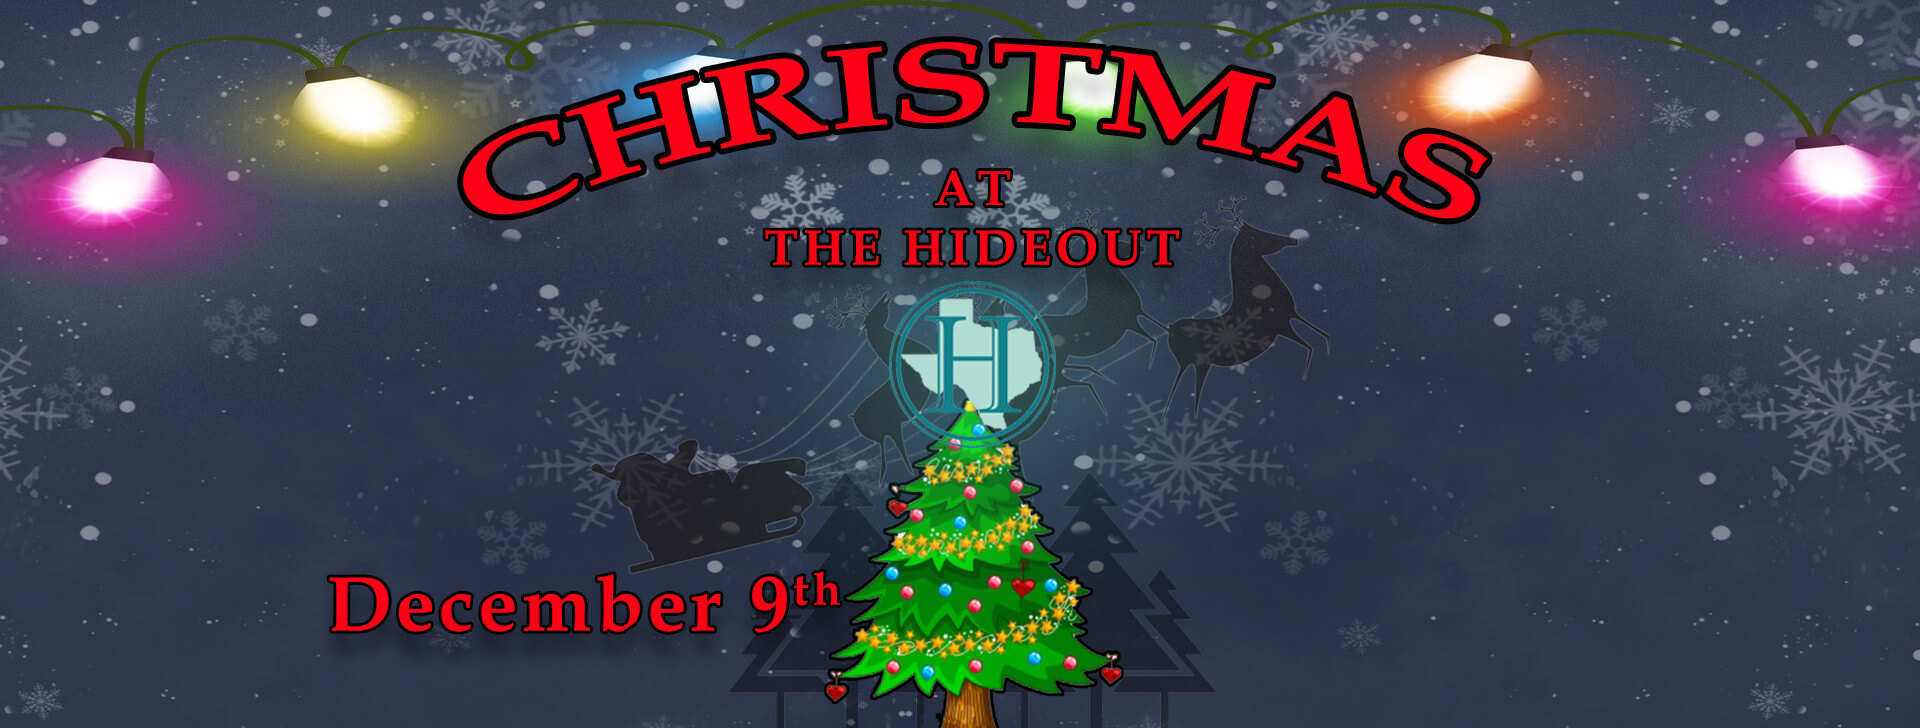 Christmas at The Hideout